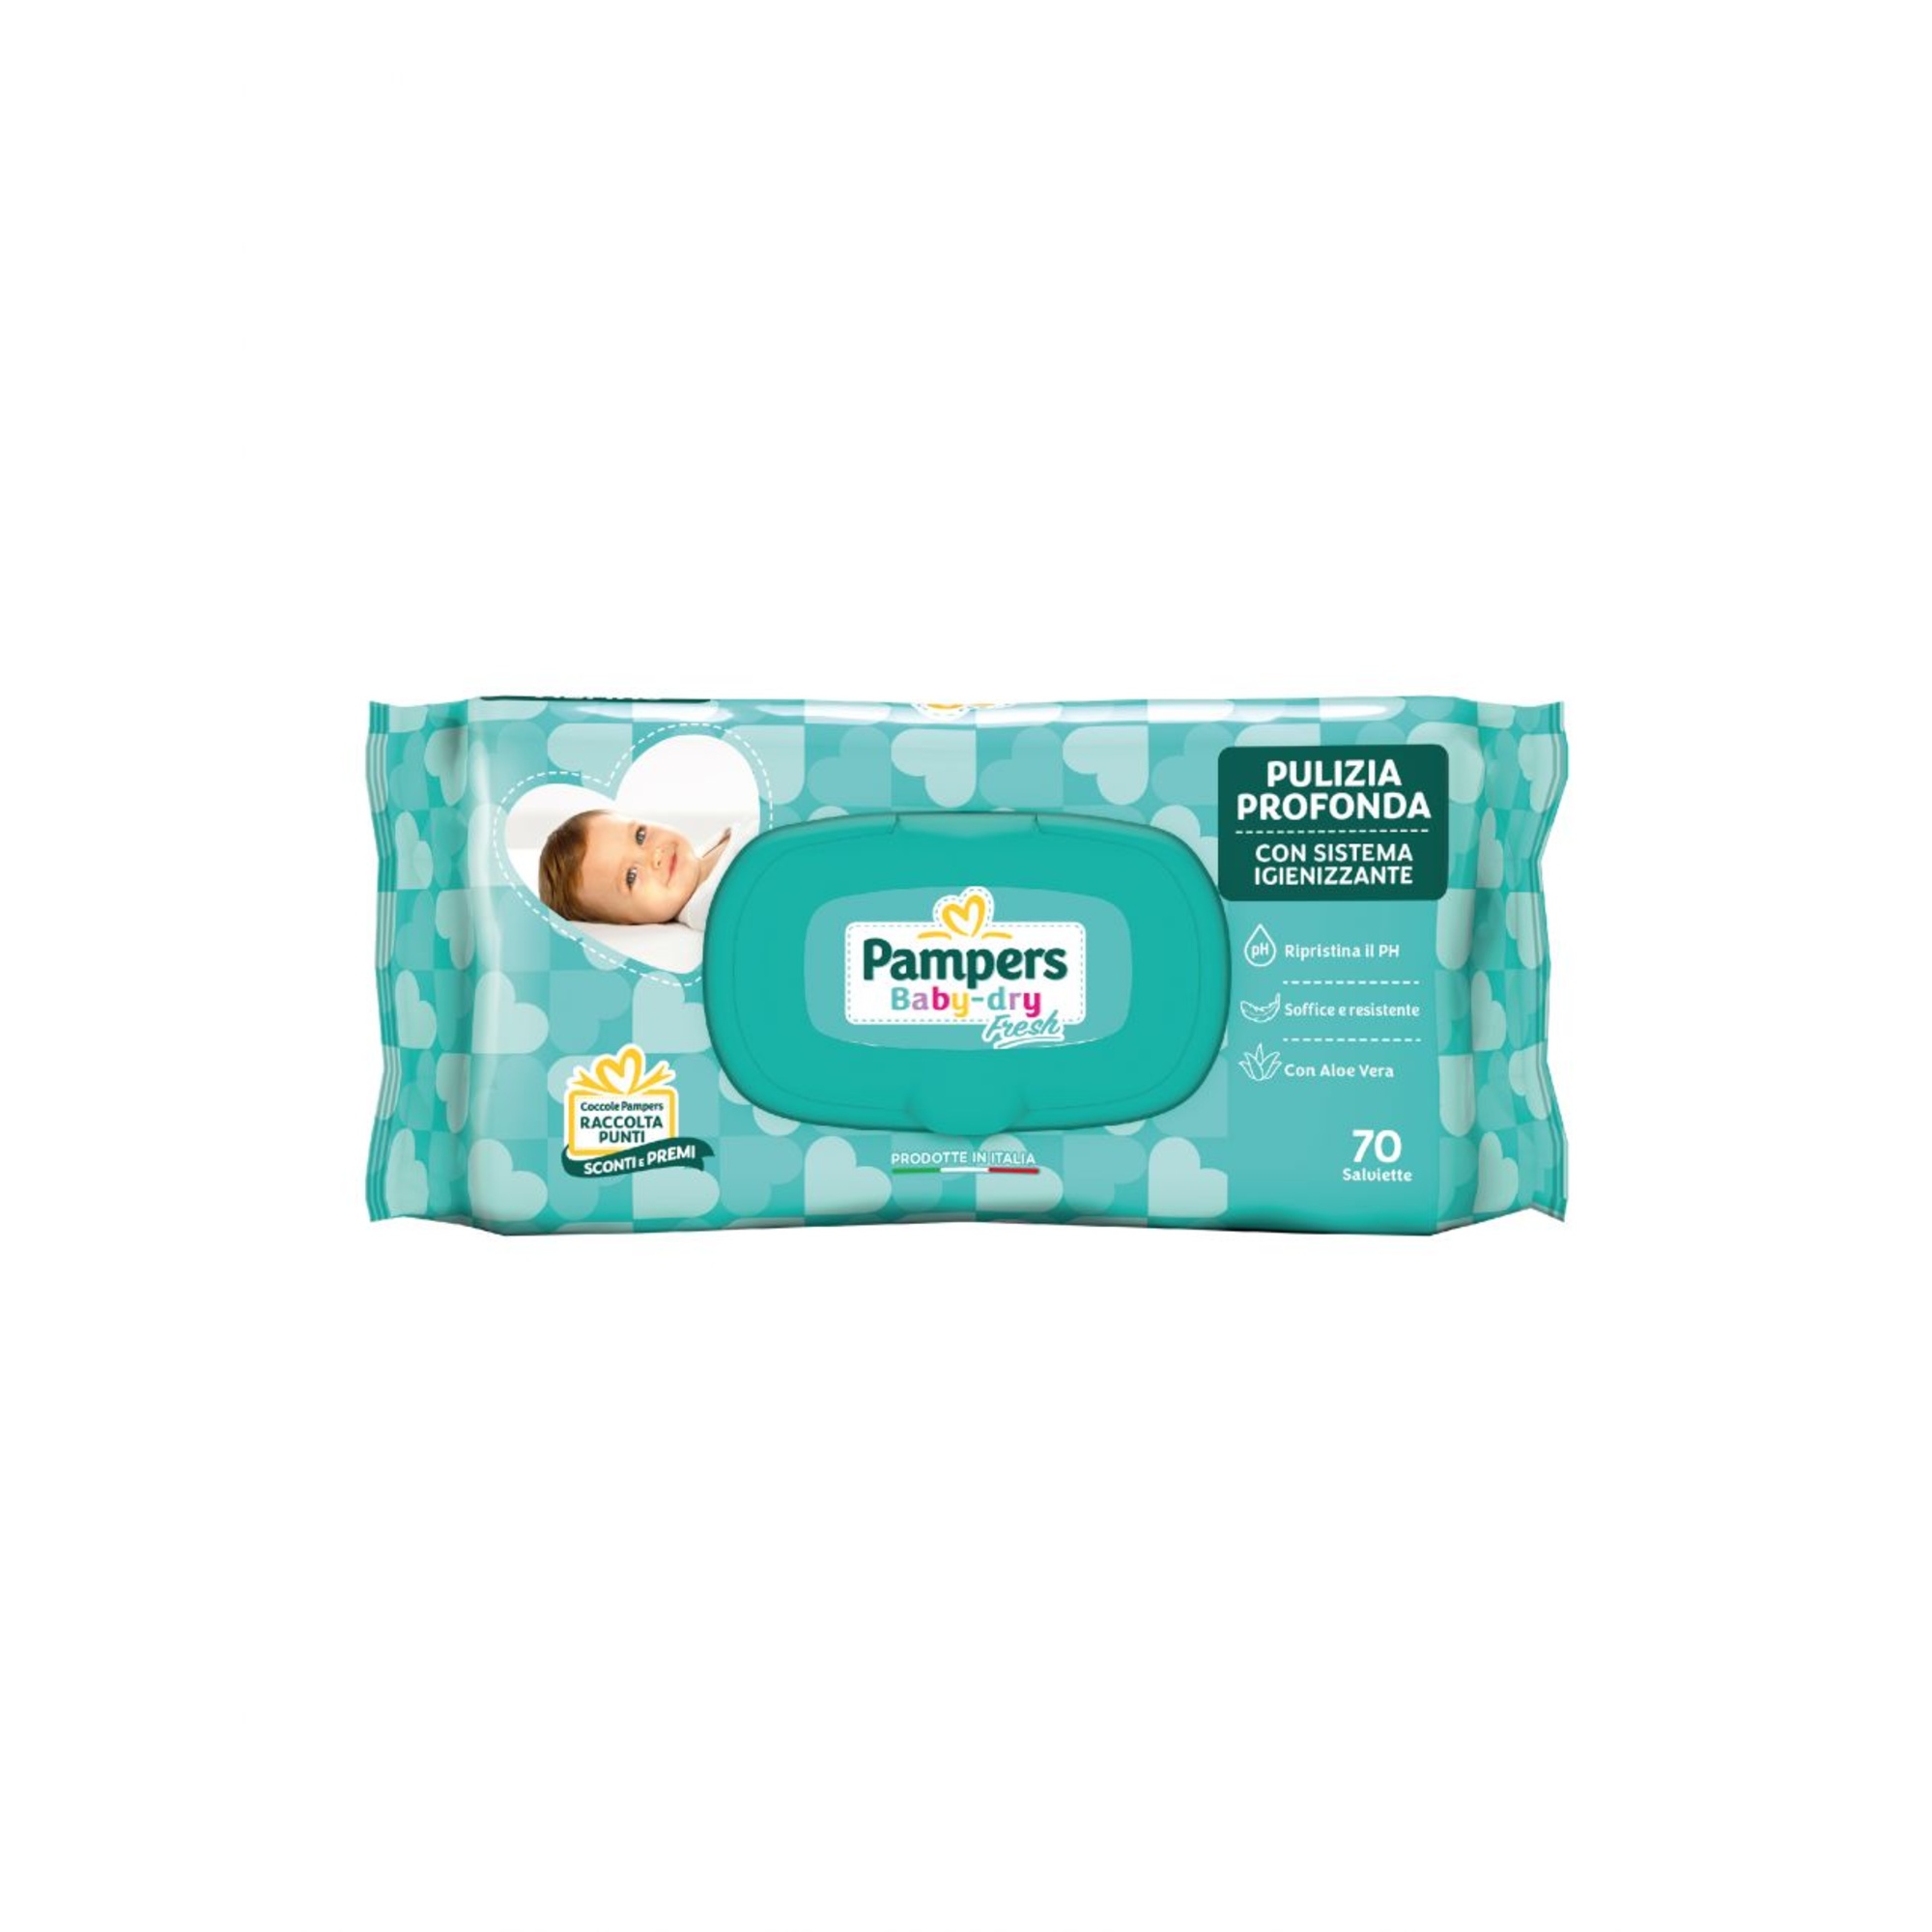 Pampers - baby fresh nuova trama x70 - Pampers